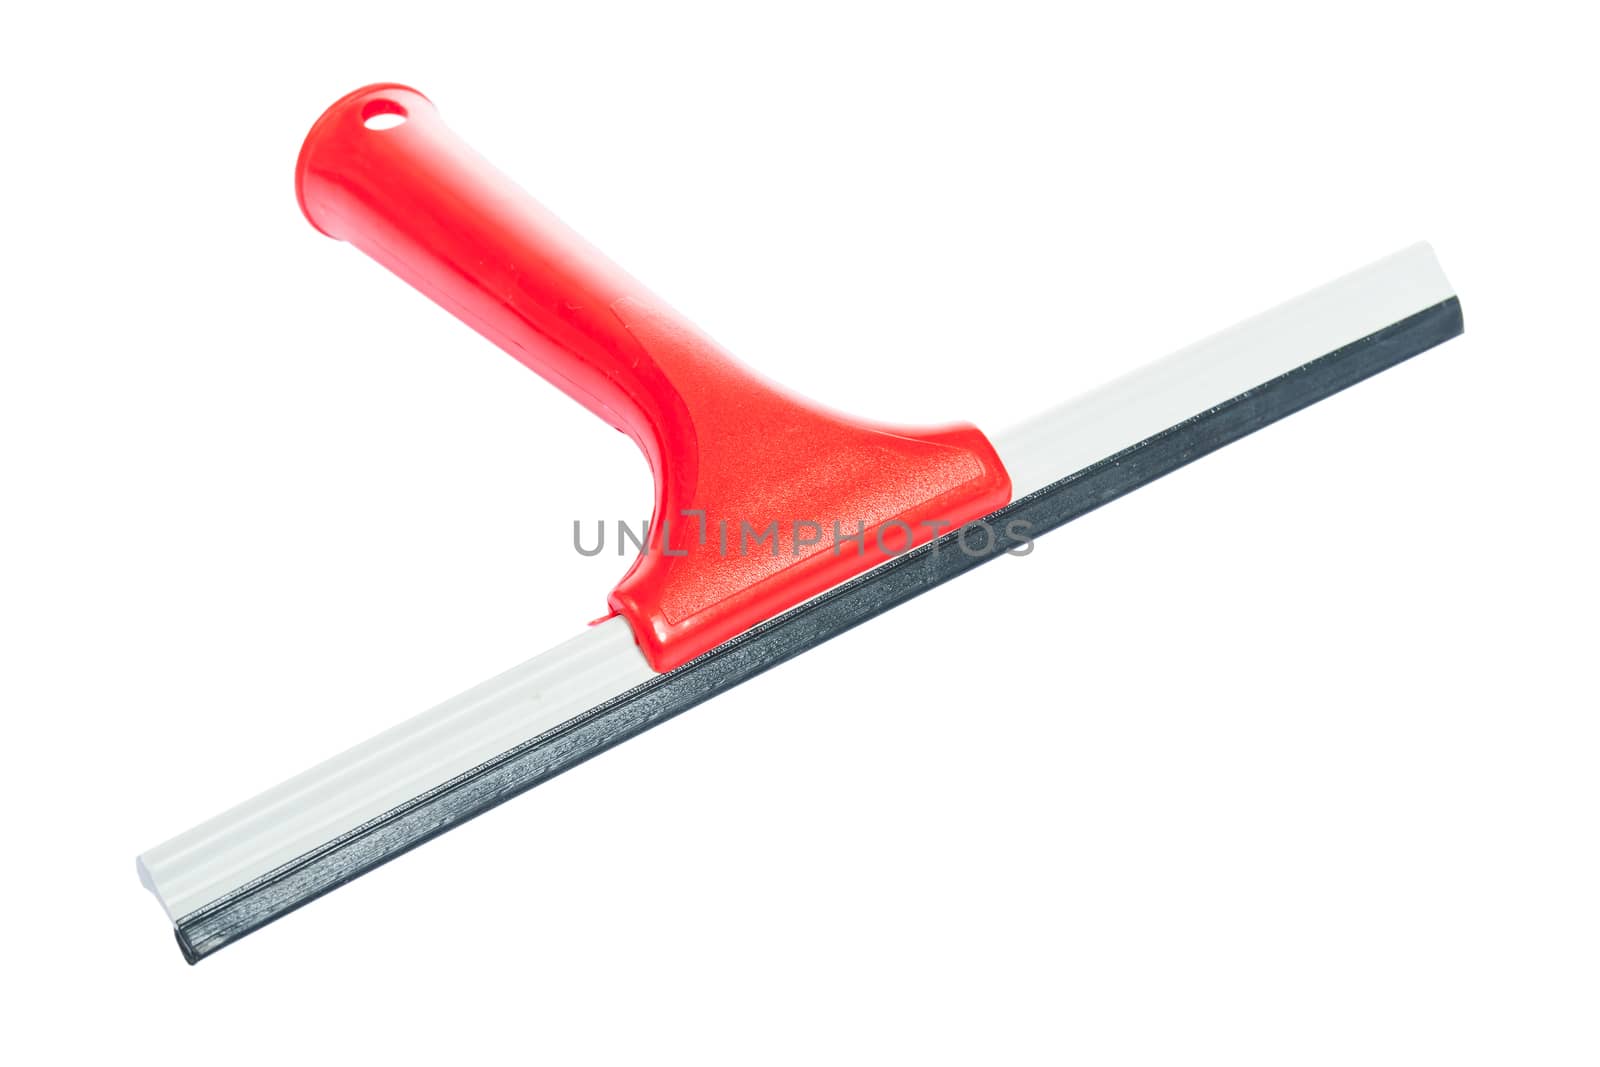 window squeegee with red handle isolated on white background by mihalec